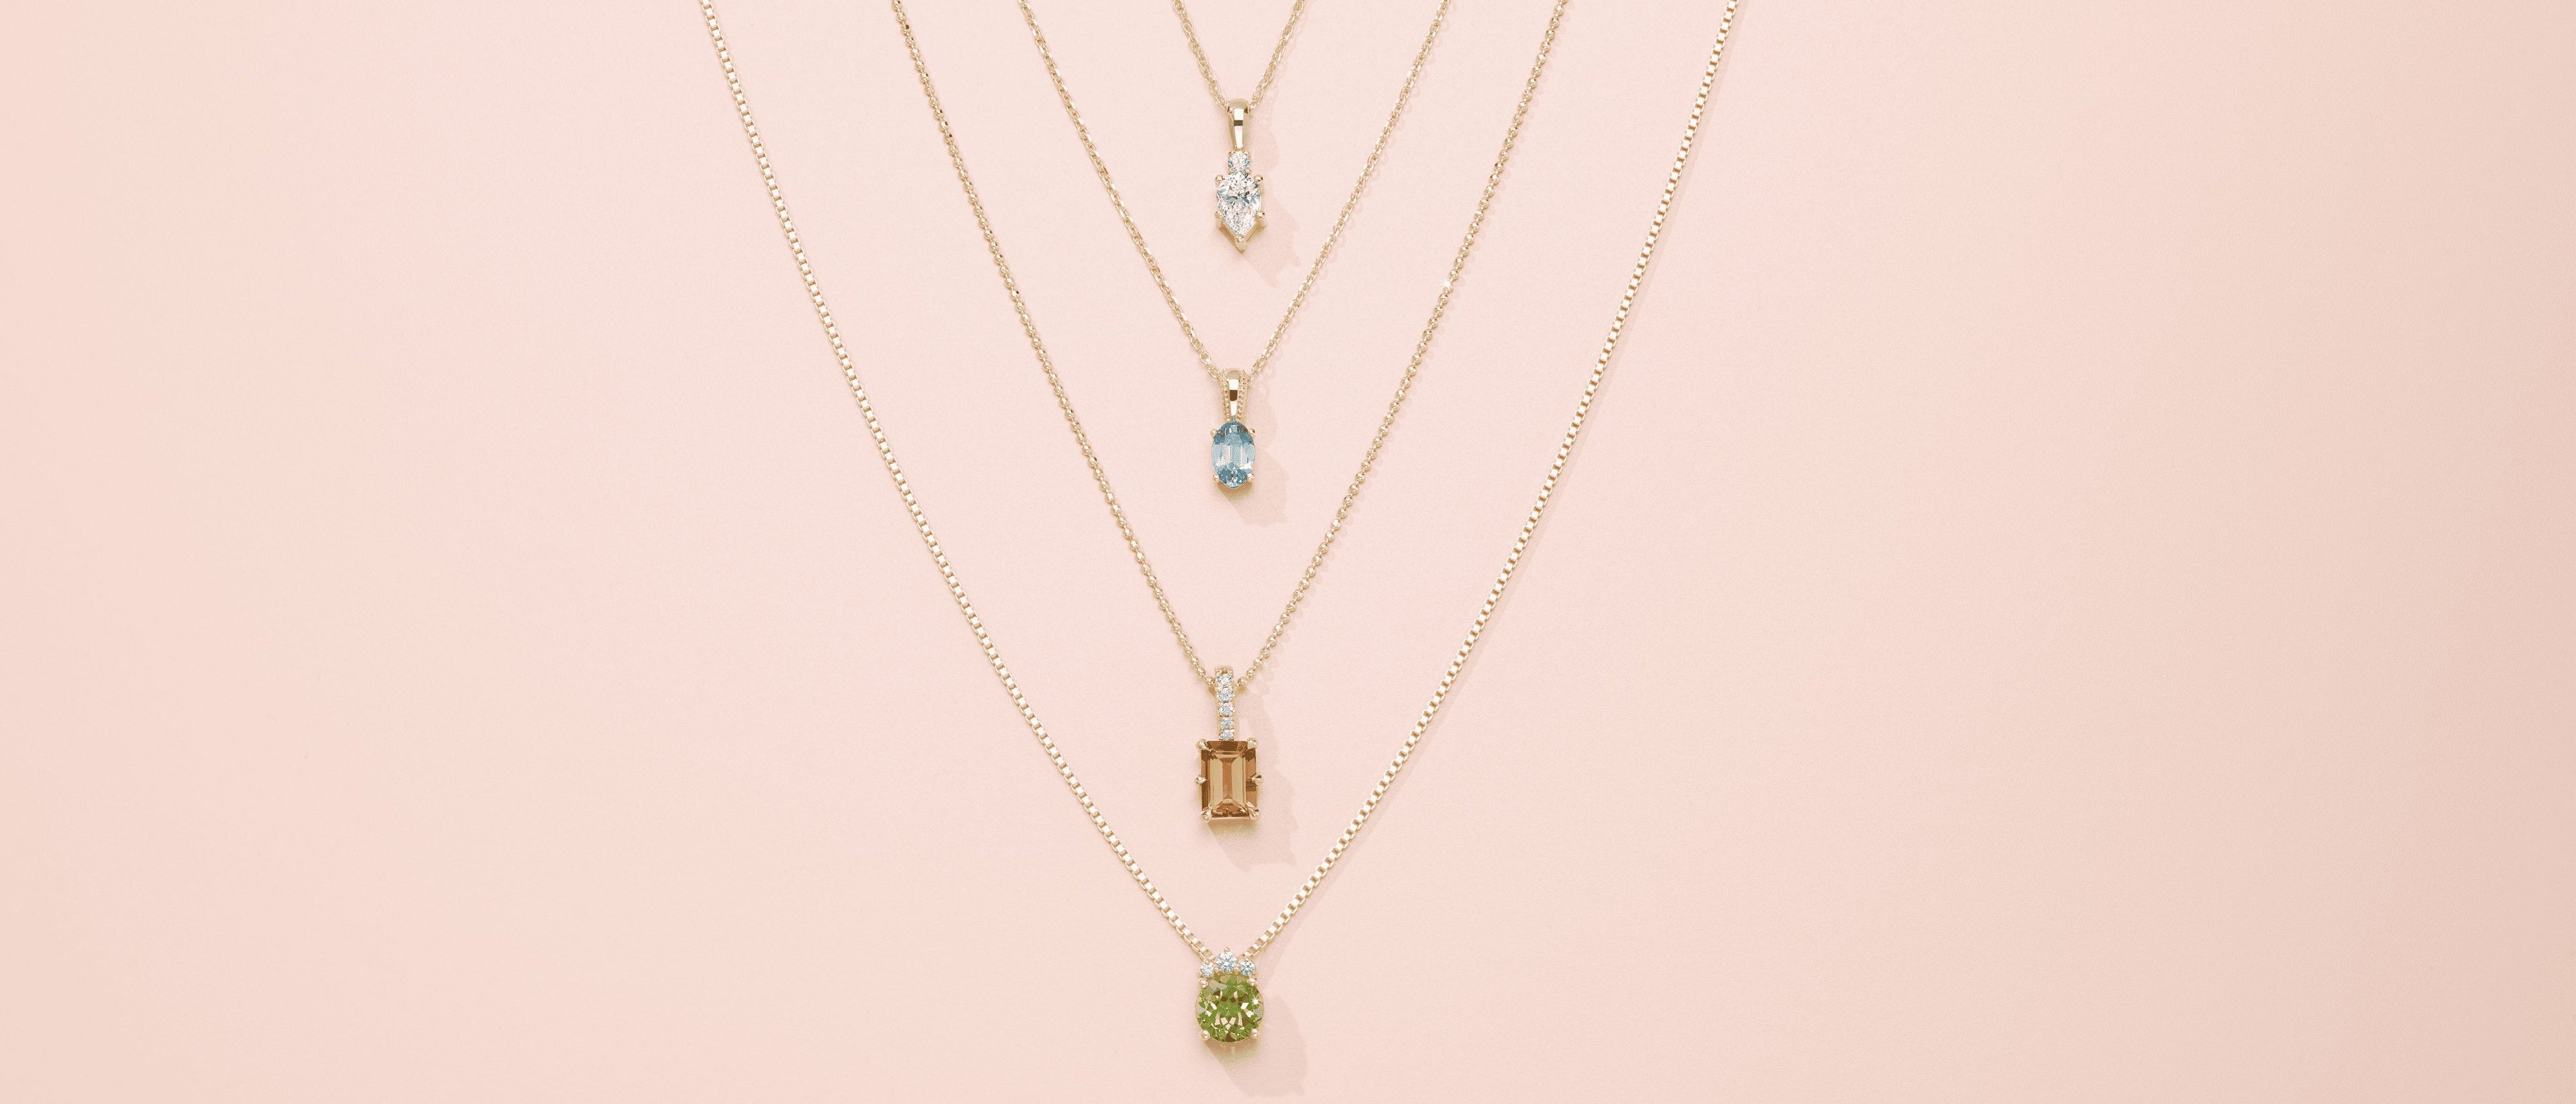 Four gemstone pendants stacked on a pink background